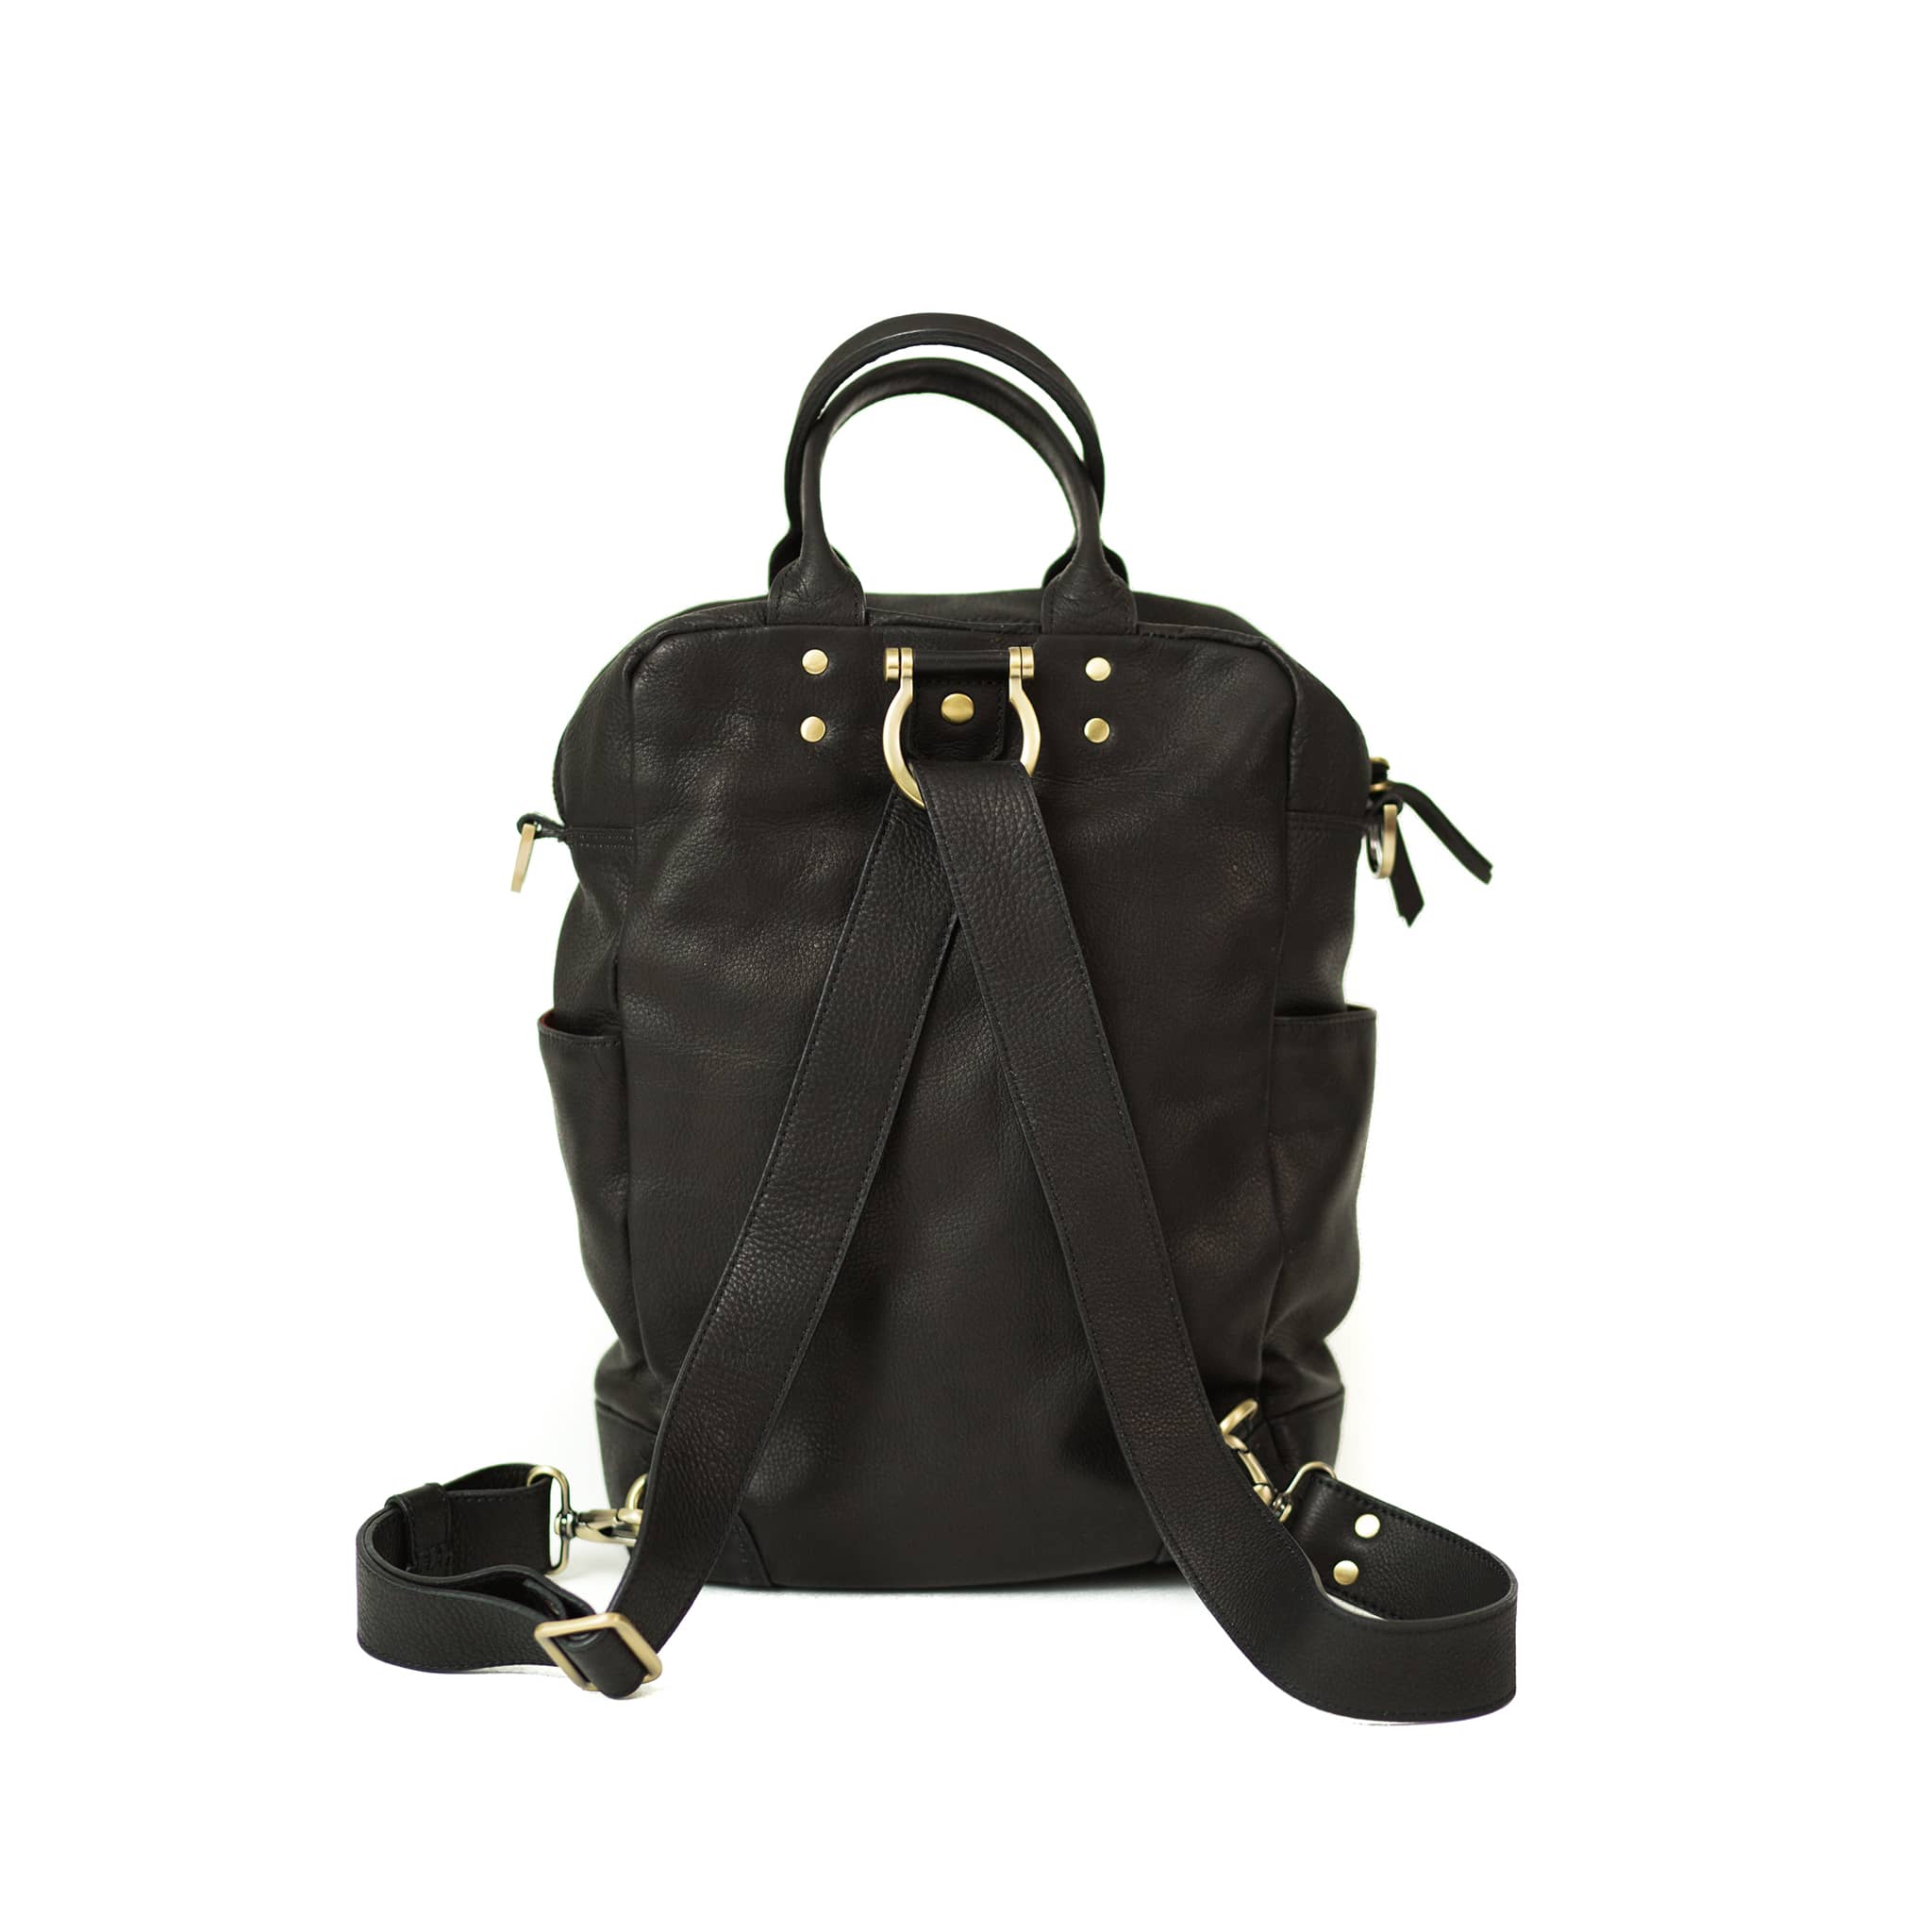 The Rodica leather crossbody bag in black raw leather can be easily adjusted to carry it as a backpack.